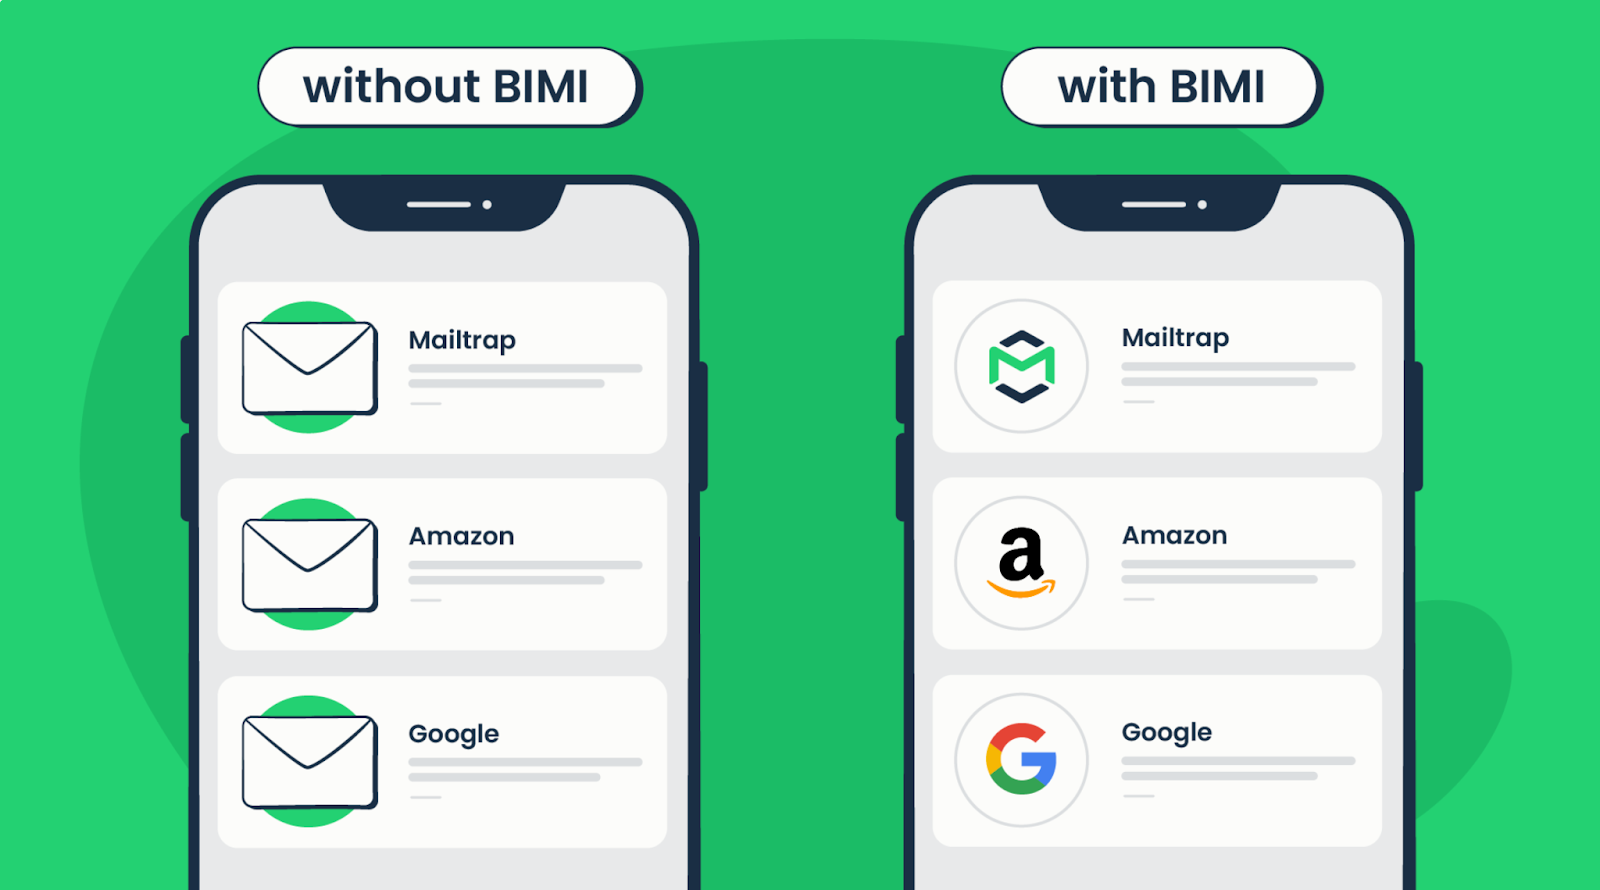 Graphic representation of emails with and without BIMI